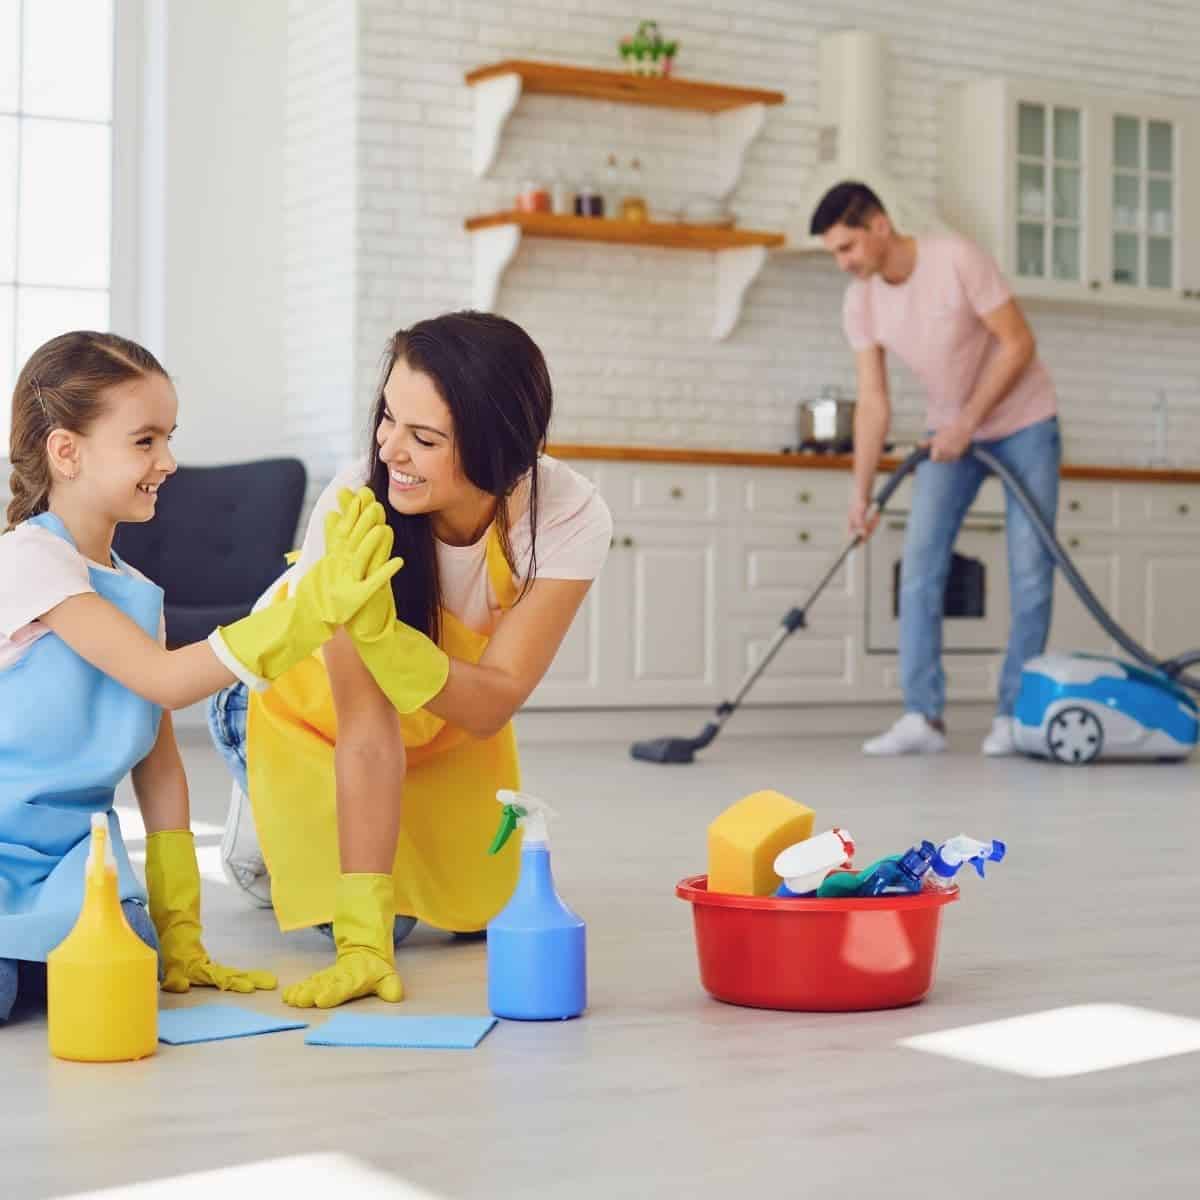 Speed Cleaning 101: House Cleaning Tips for Cleaning and